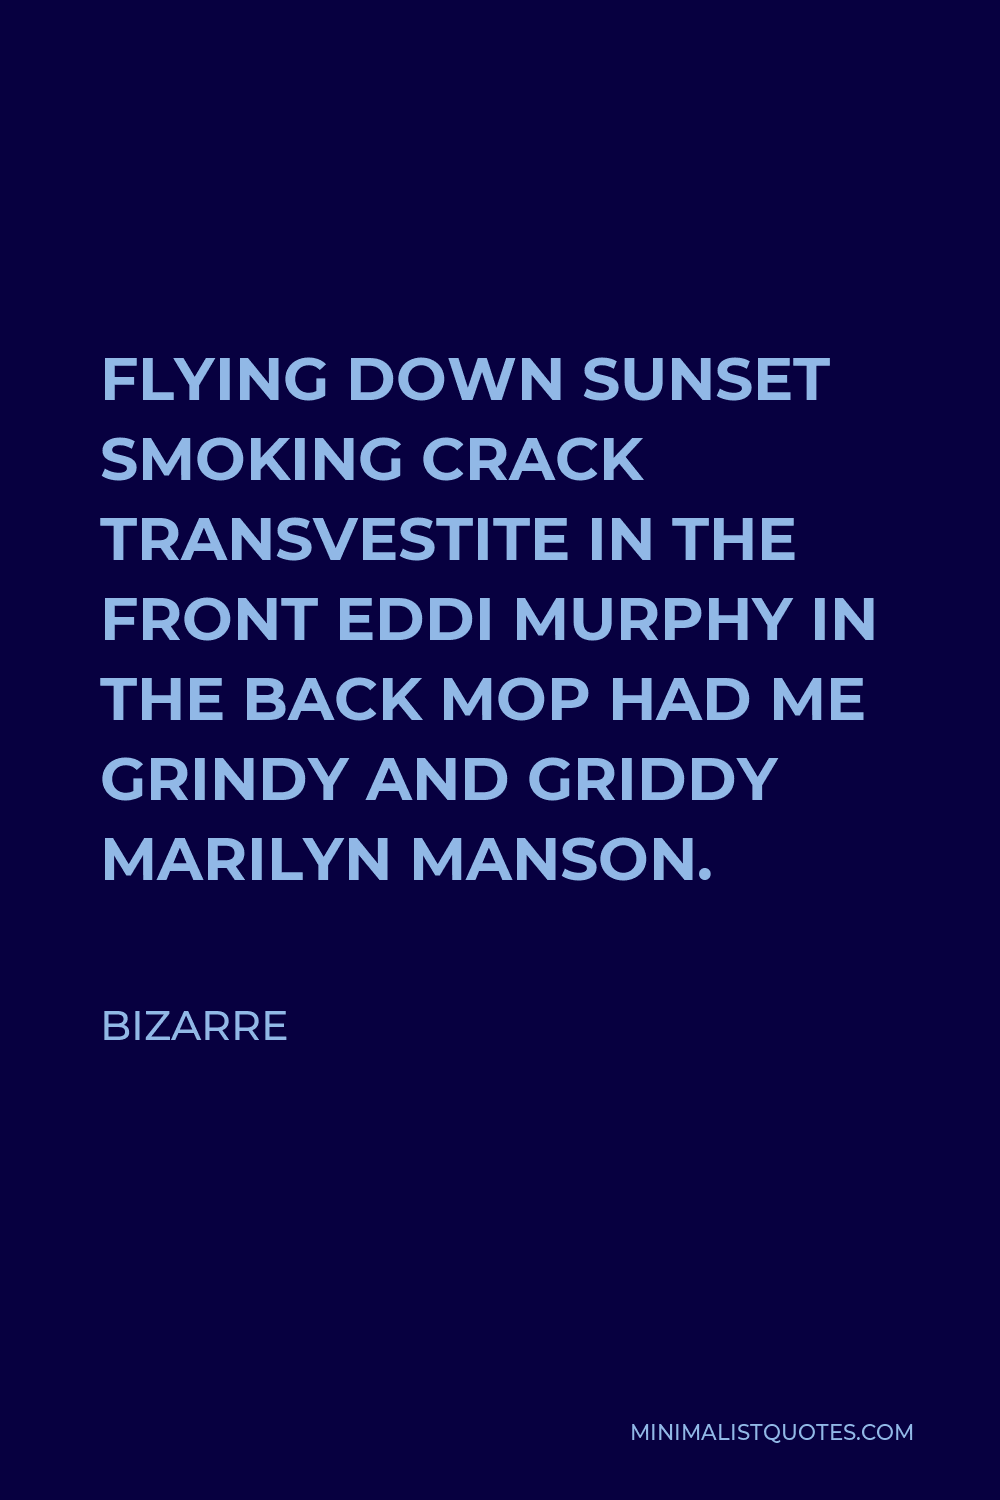 Bizarre Quote - FLYING DOWN SUNSET SMOKING CRACK TRANSVESTITE IN THE FRONT EDDI MURPHY IN THE BACK MOP HAD ME GRINDY AND GRIDDY MARILYN MANSON.